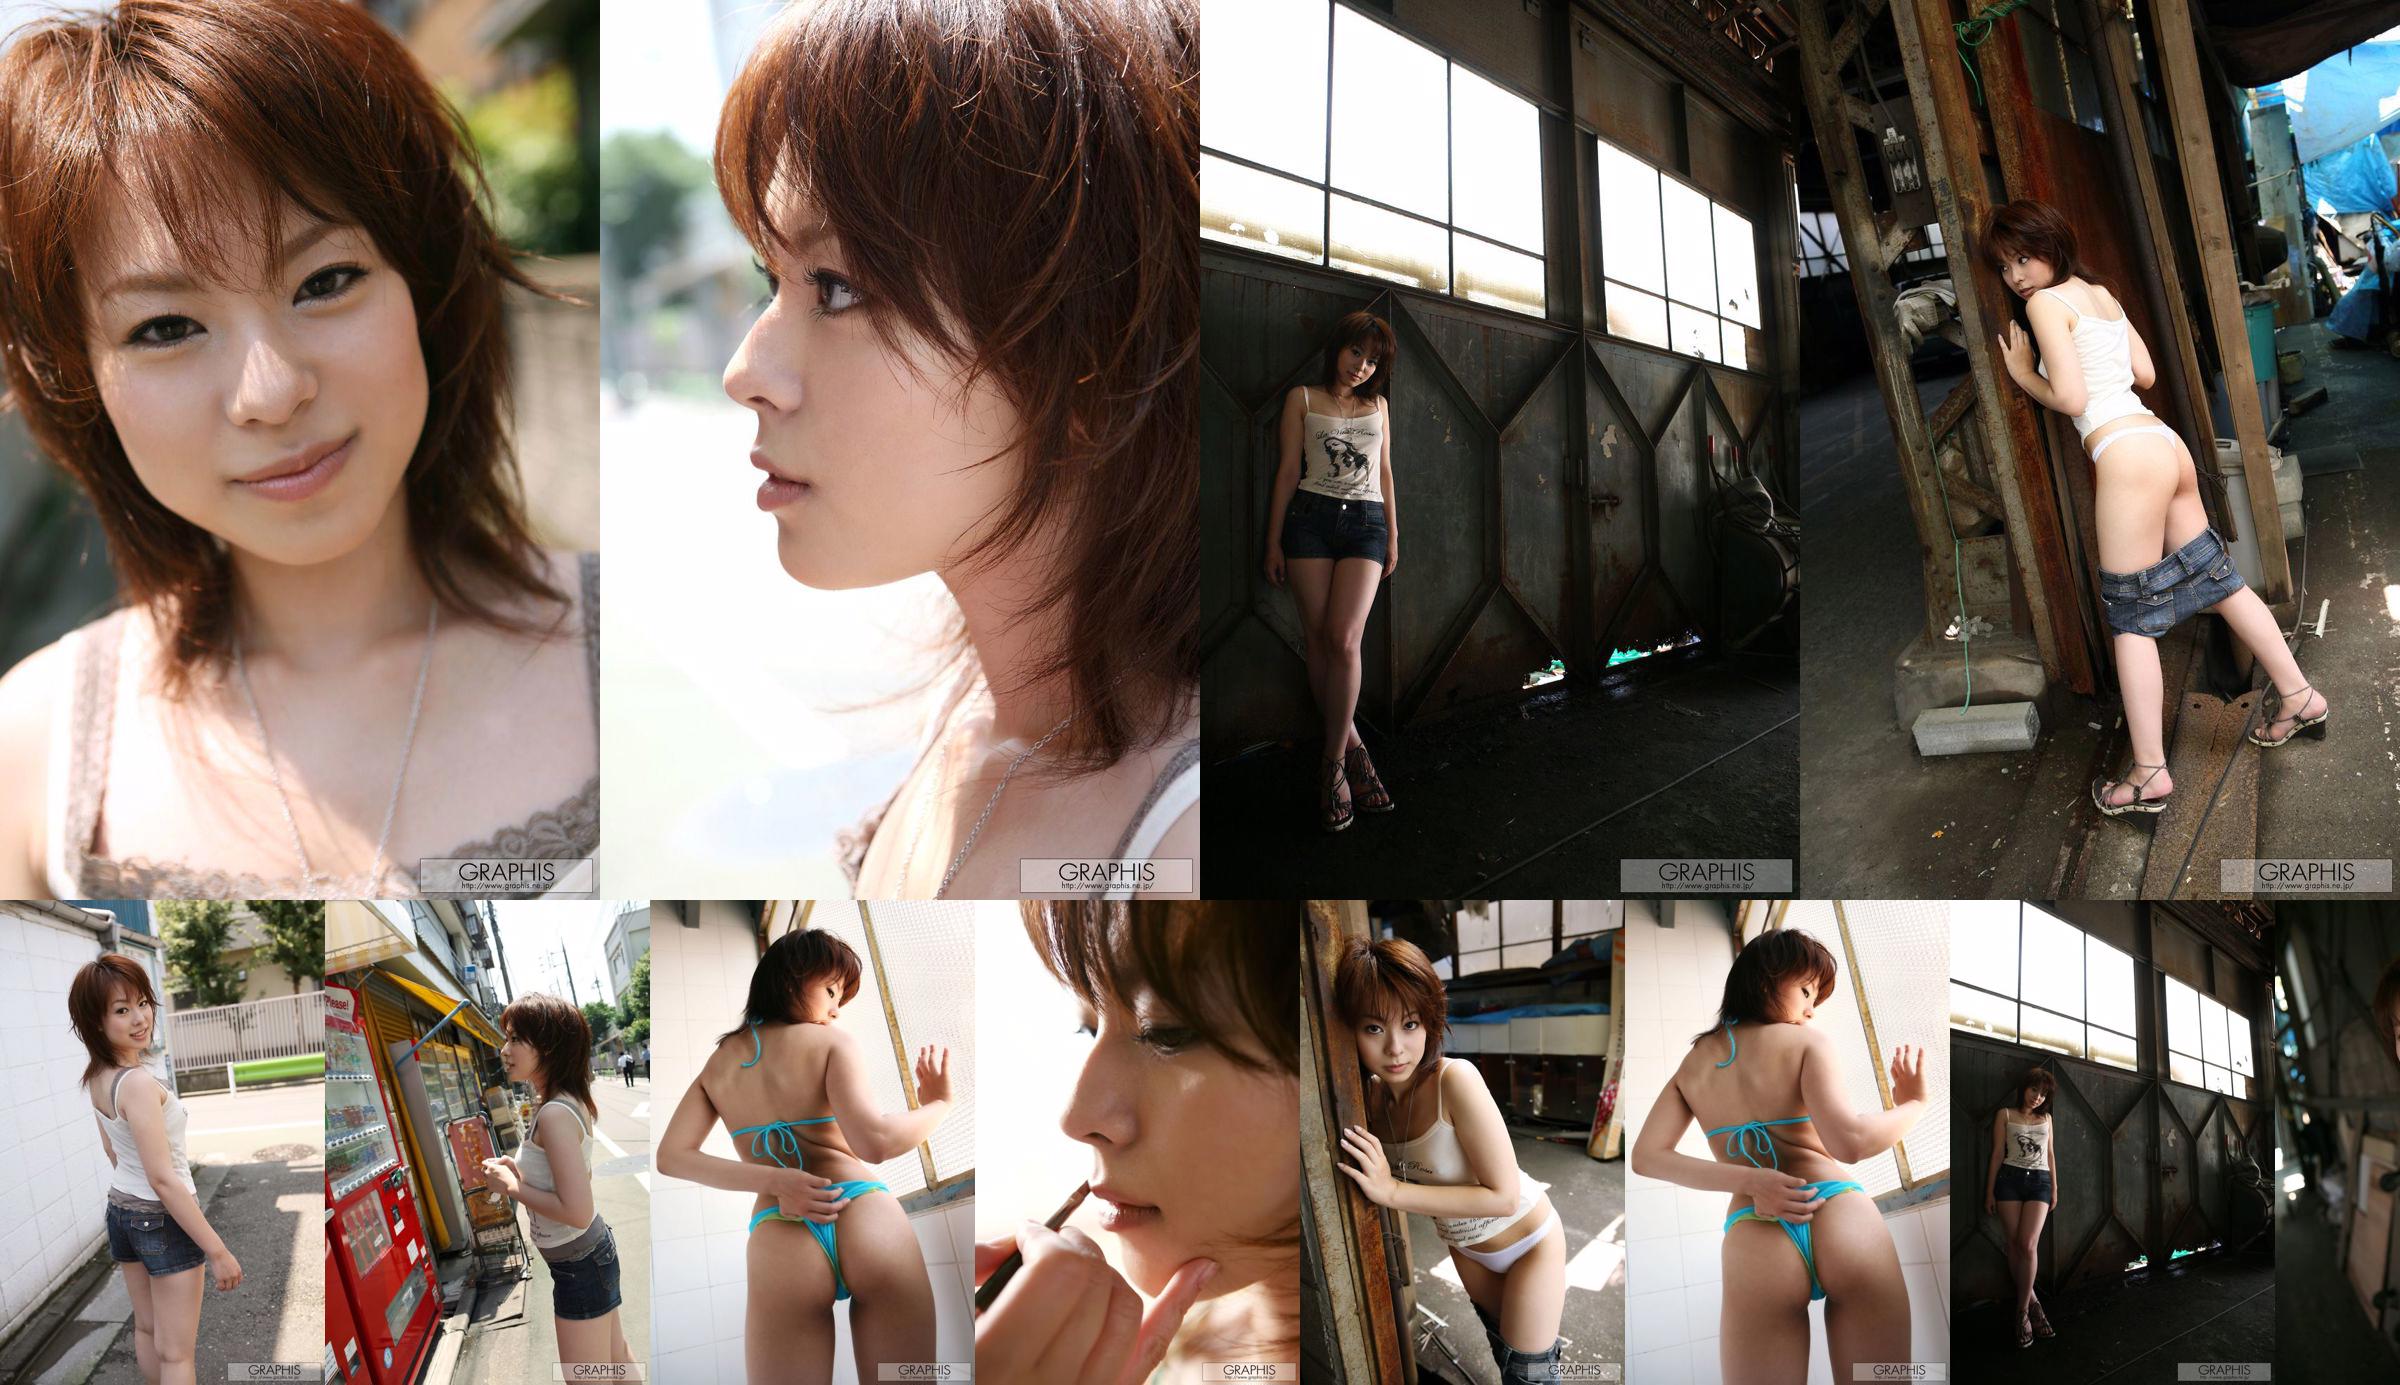 Mina Manabe Mina Manabe [Graphis] First Gravure First Take Off Daughter No.bcfb3a Pagina 1